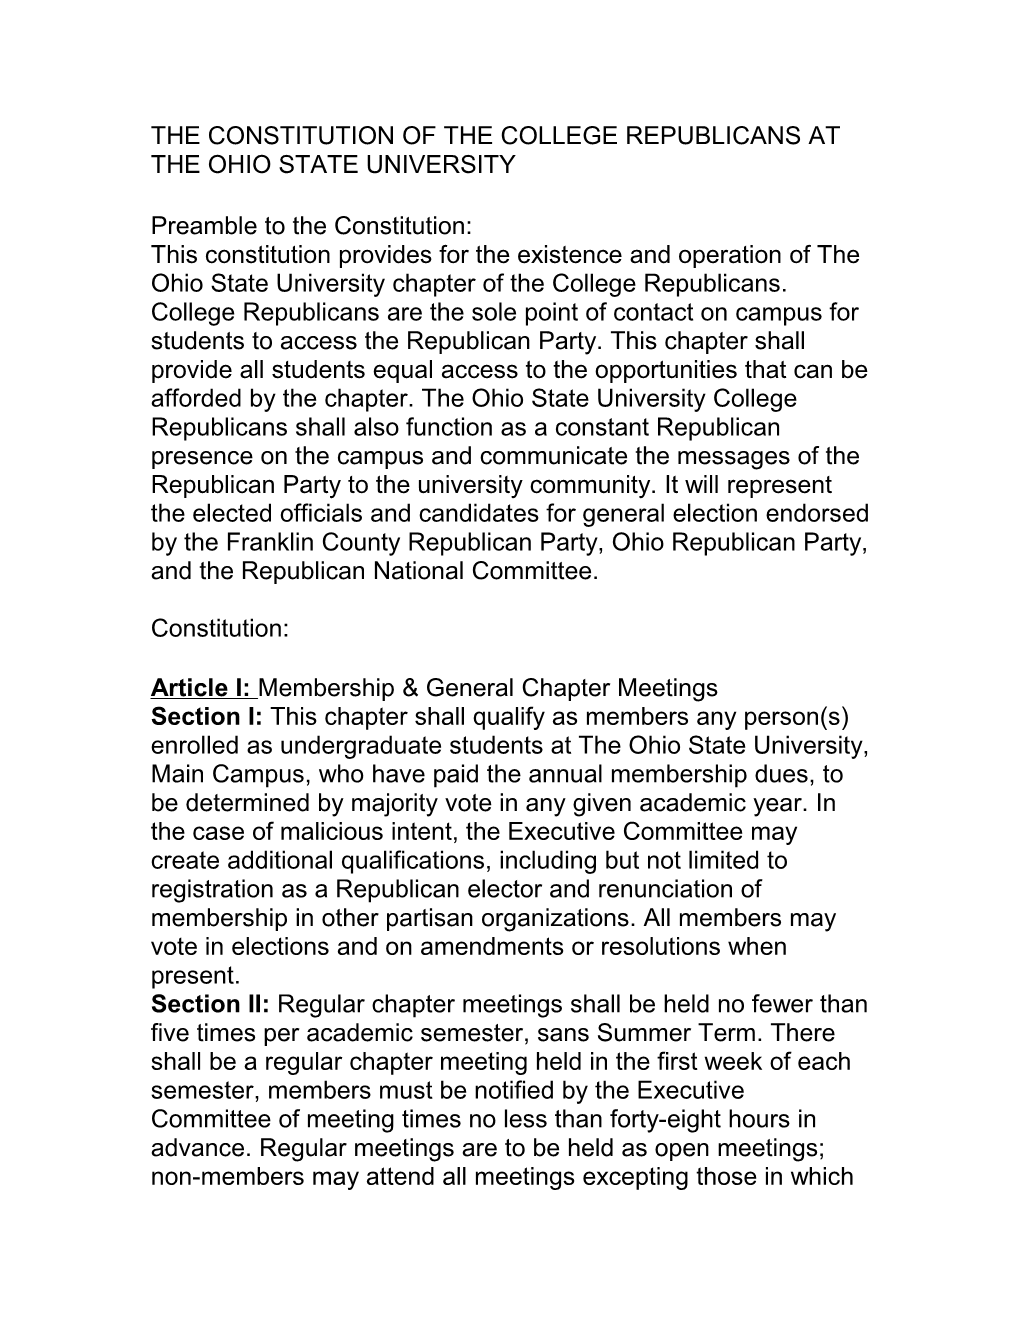 The Constitution of the College Republicans at the Ohio State University